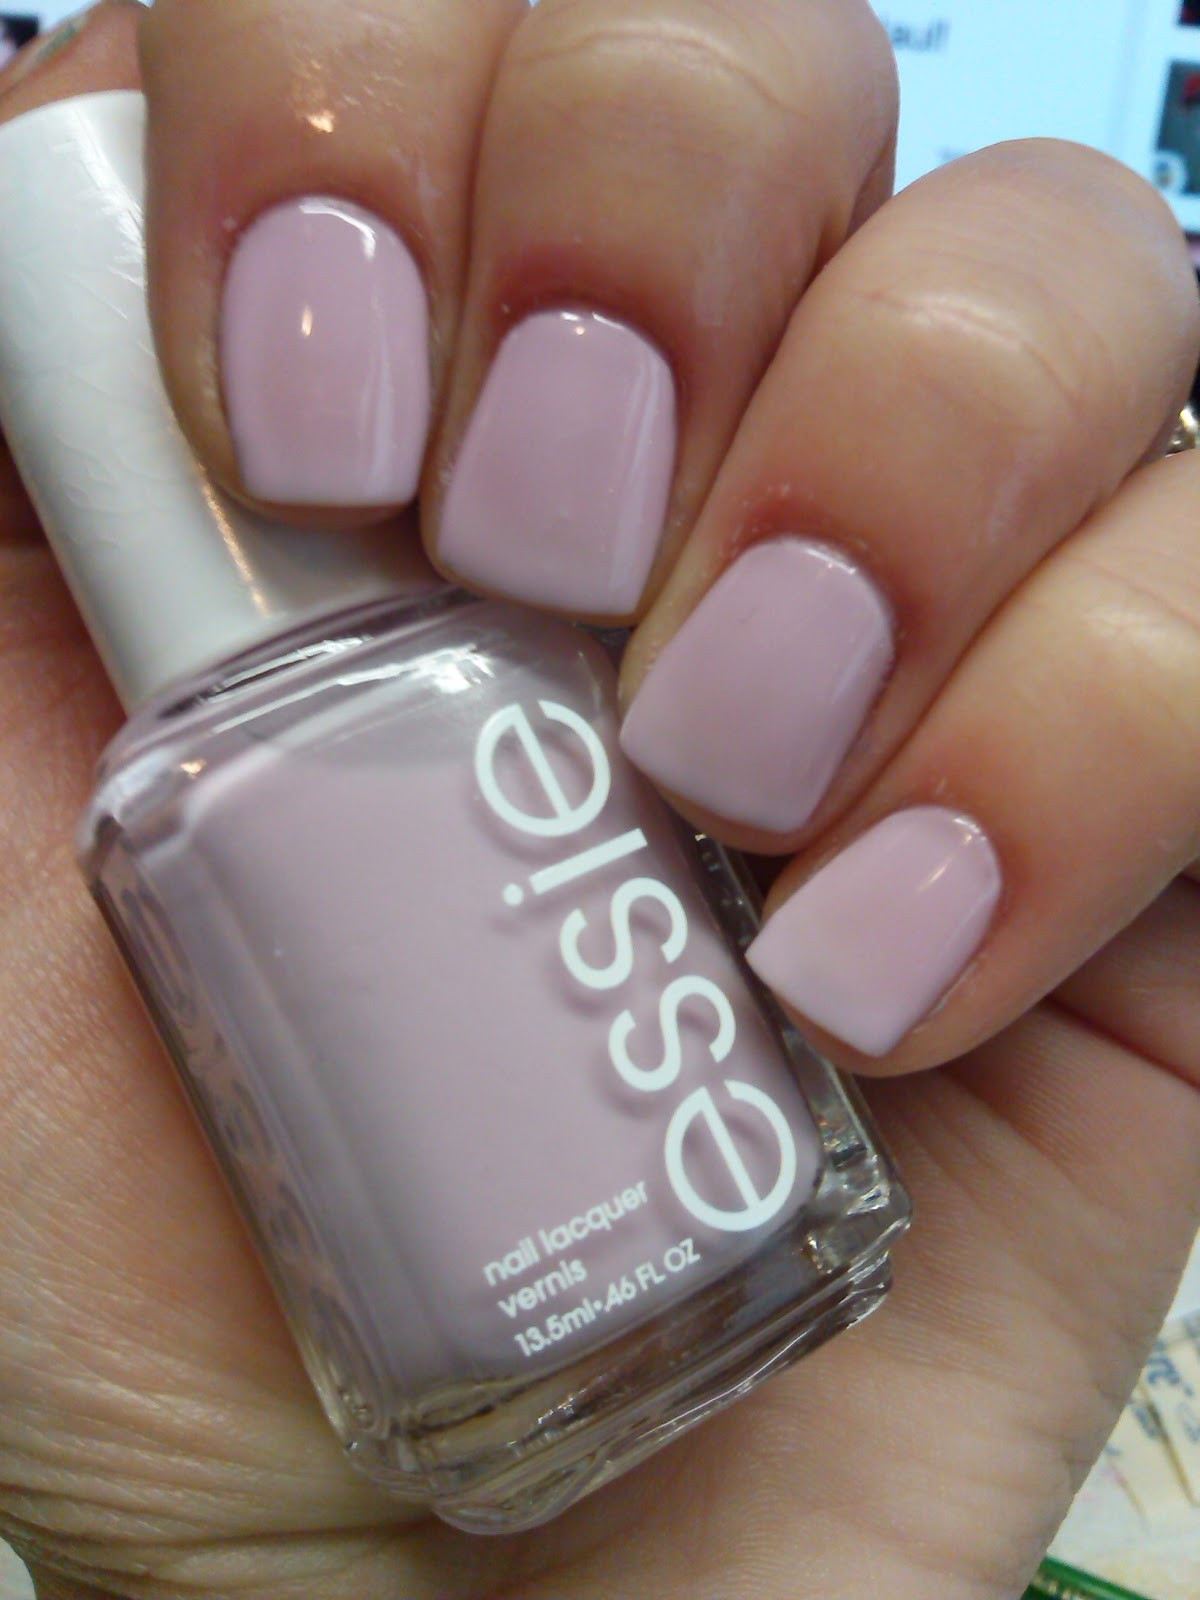 Hubby For Dessert Essie
 KBeauty Reviews ESSIE WEDDING COLLECTION 2015 REVIEW